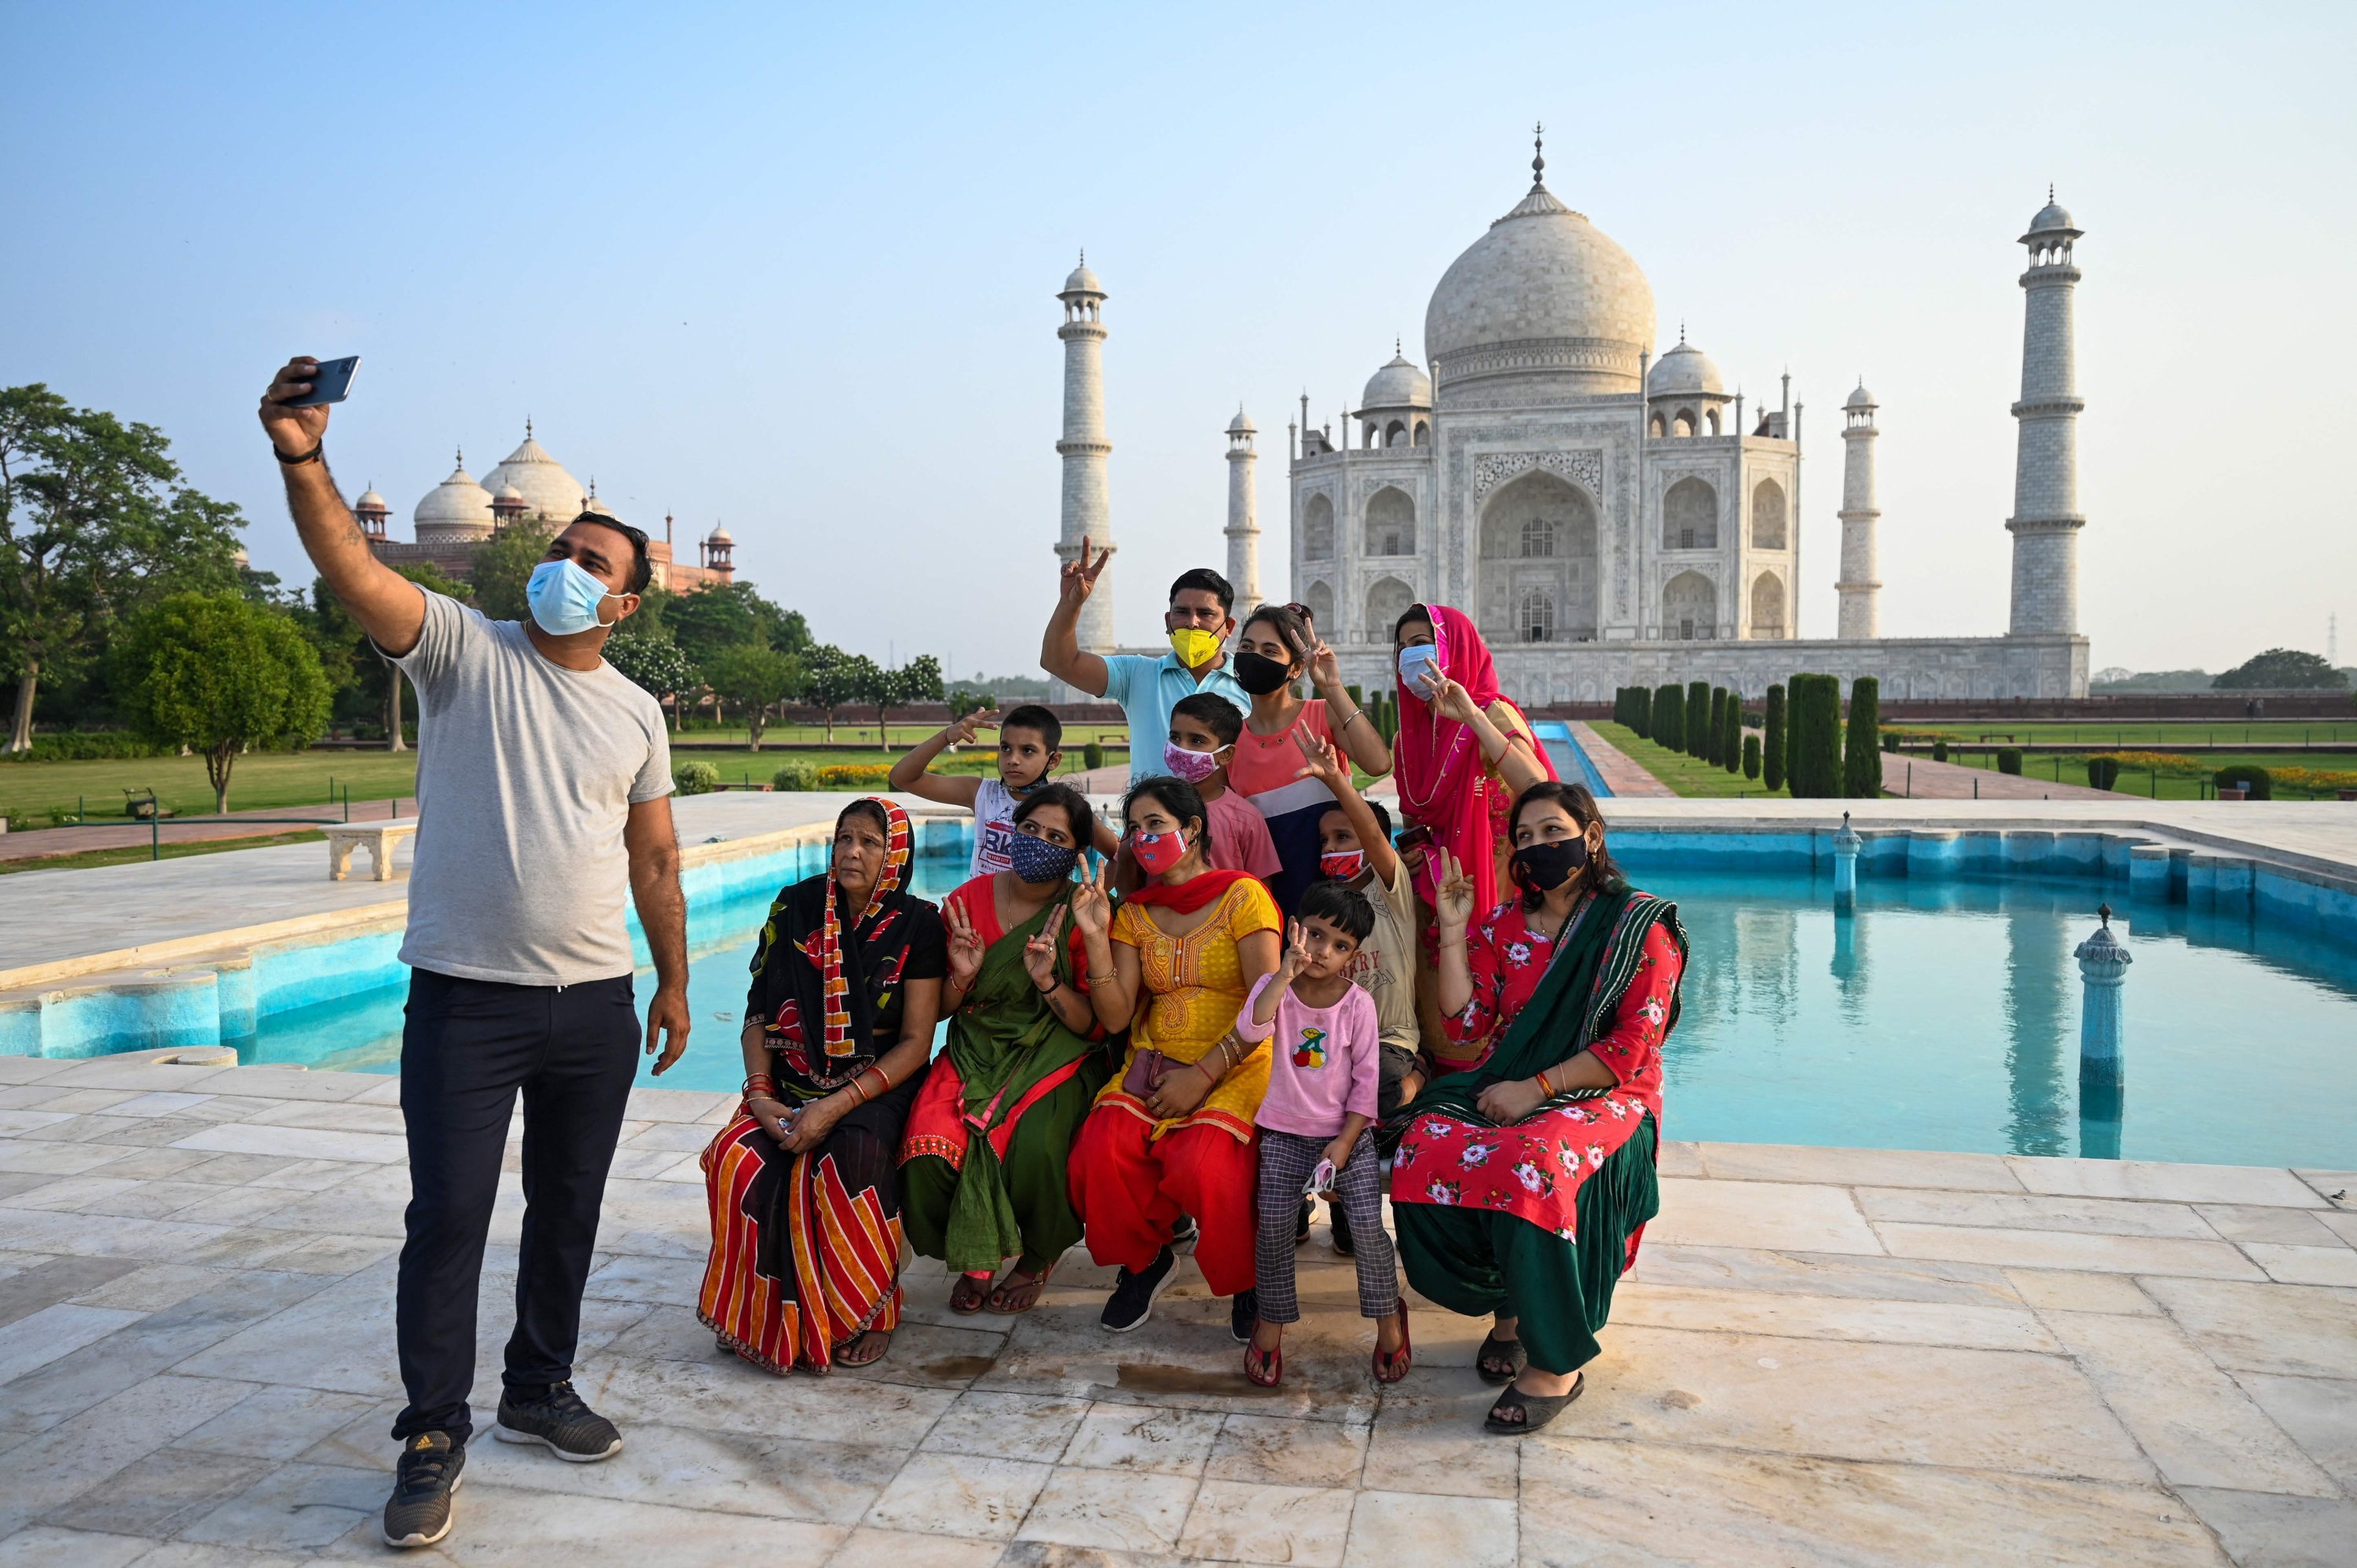 India reopens Taj Mahal for tourists as COVID-19 curbs eased | Daily Sabah